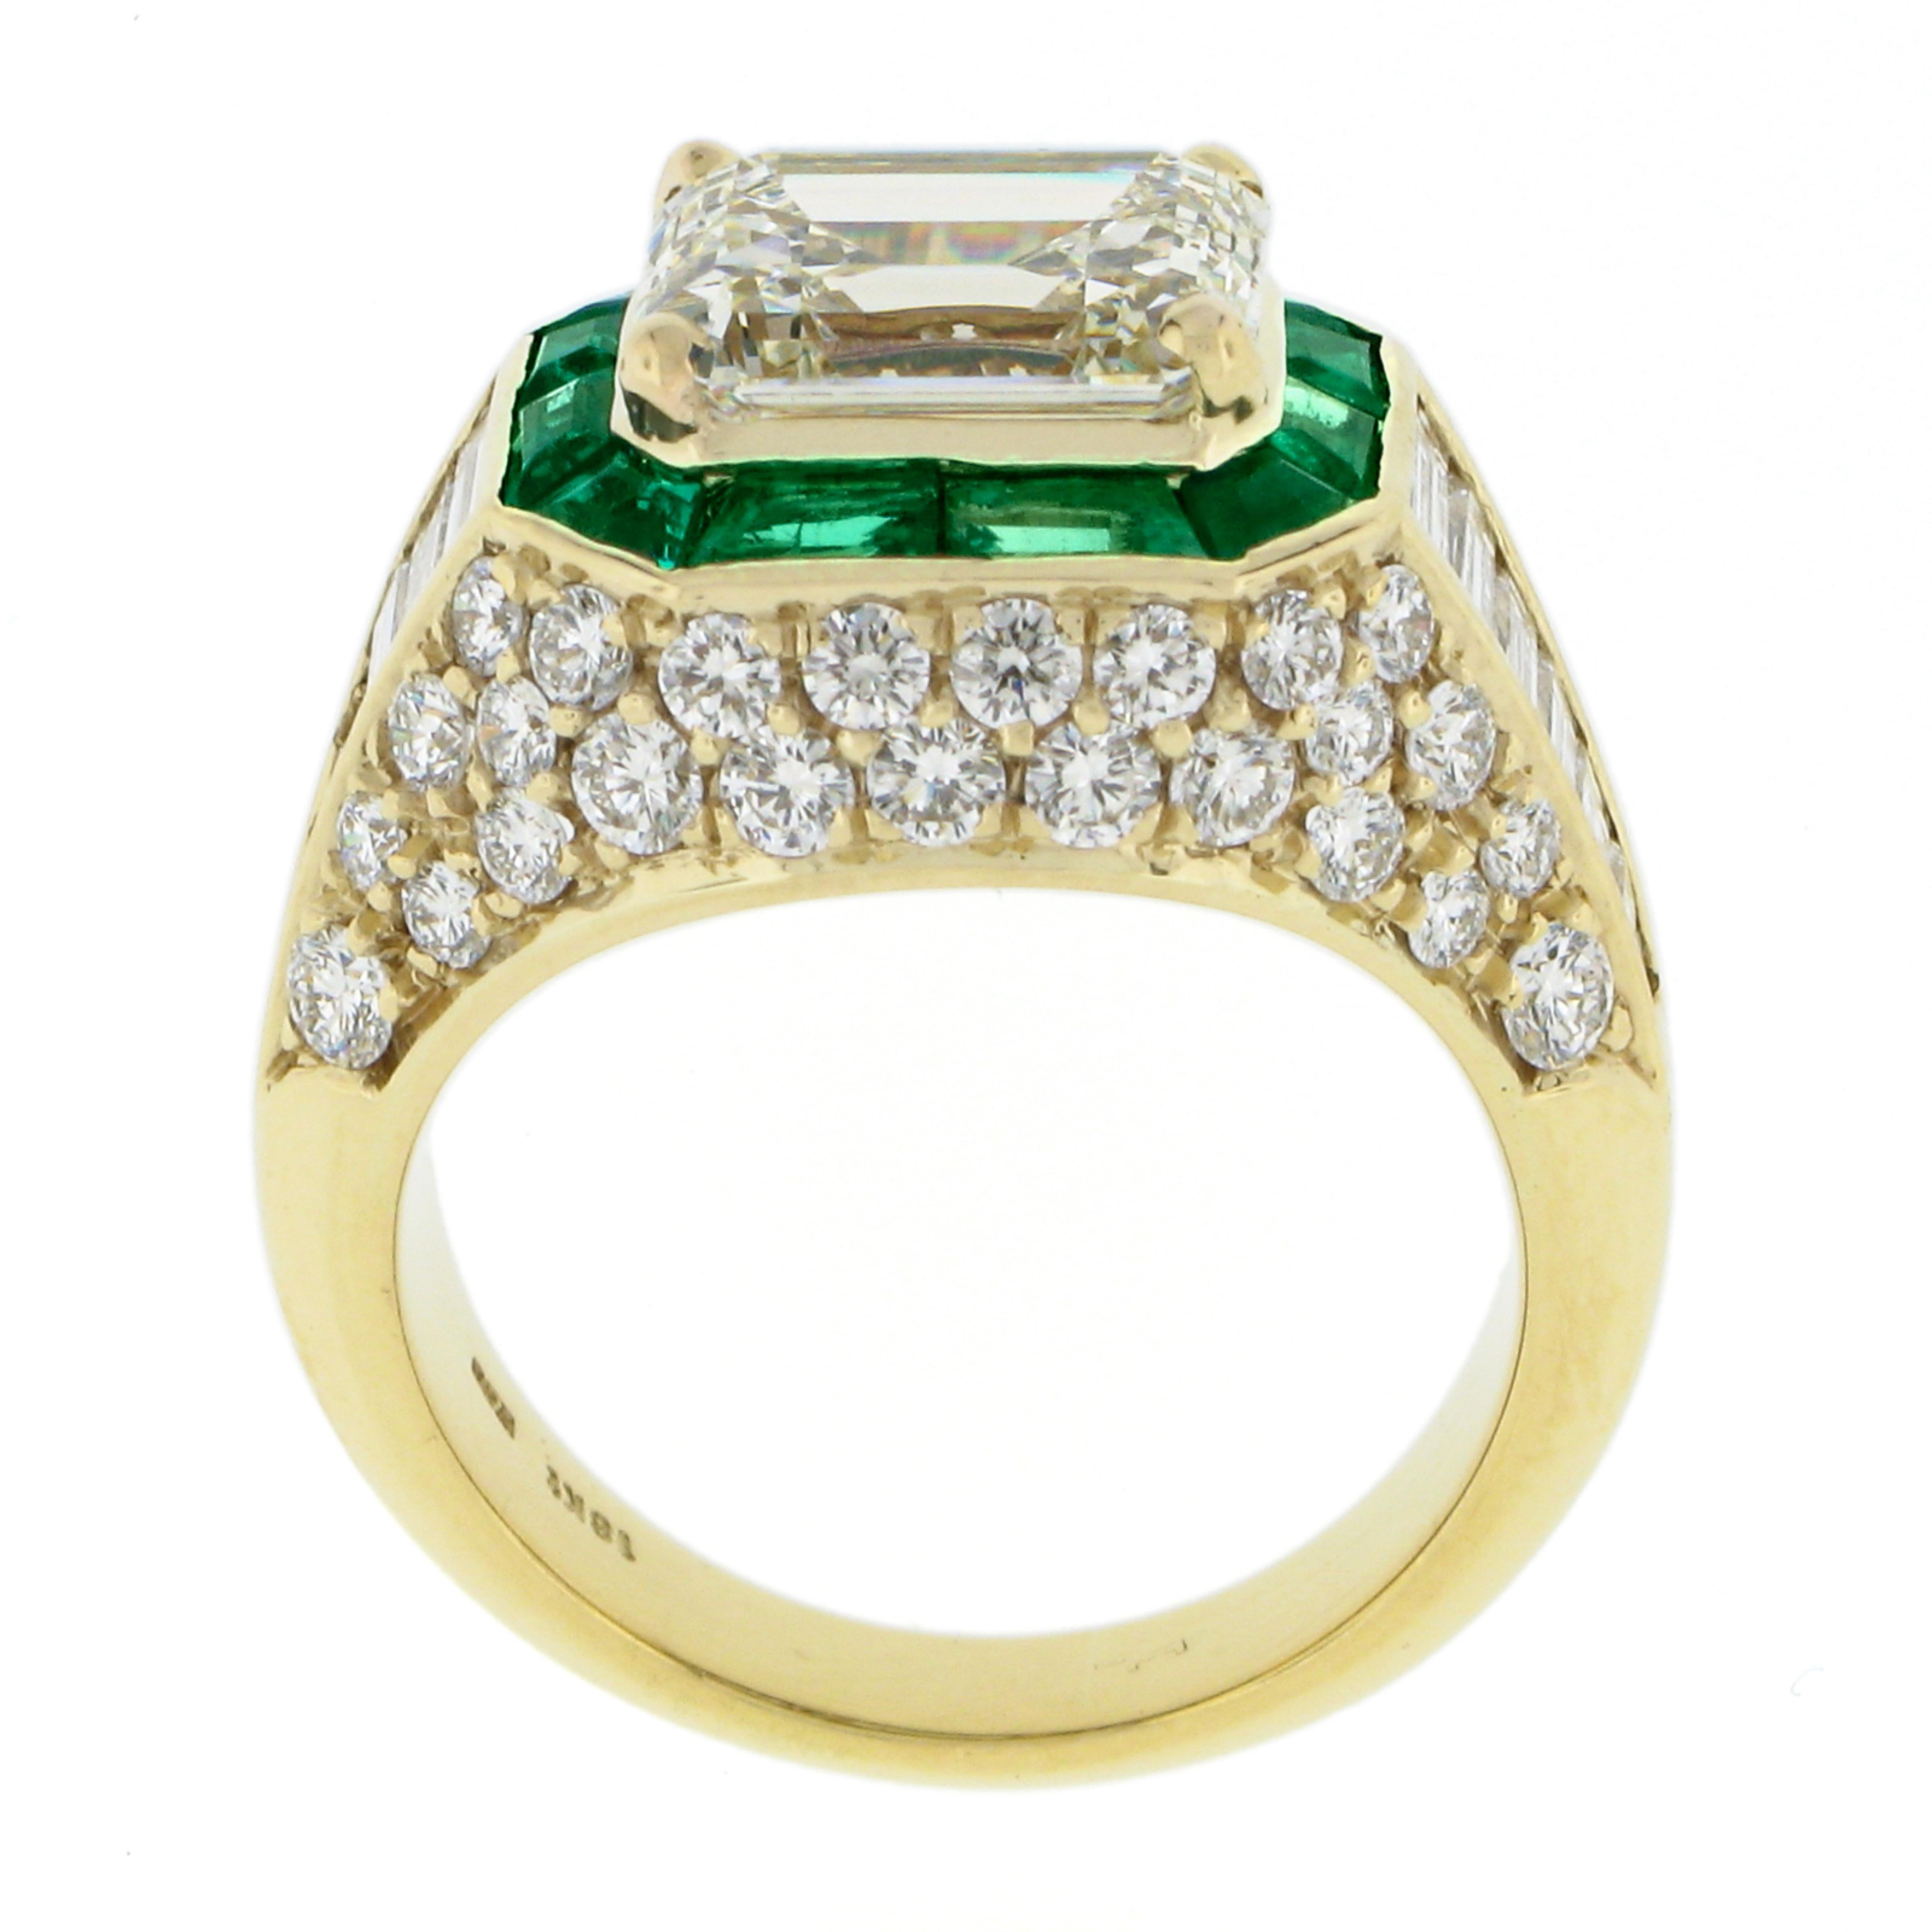 Estate 18k Yellow Gold 6.07ct GIA Emerald Cut & Baguette Diamond Engagement Ring For Sale 4